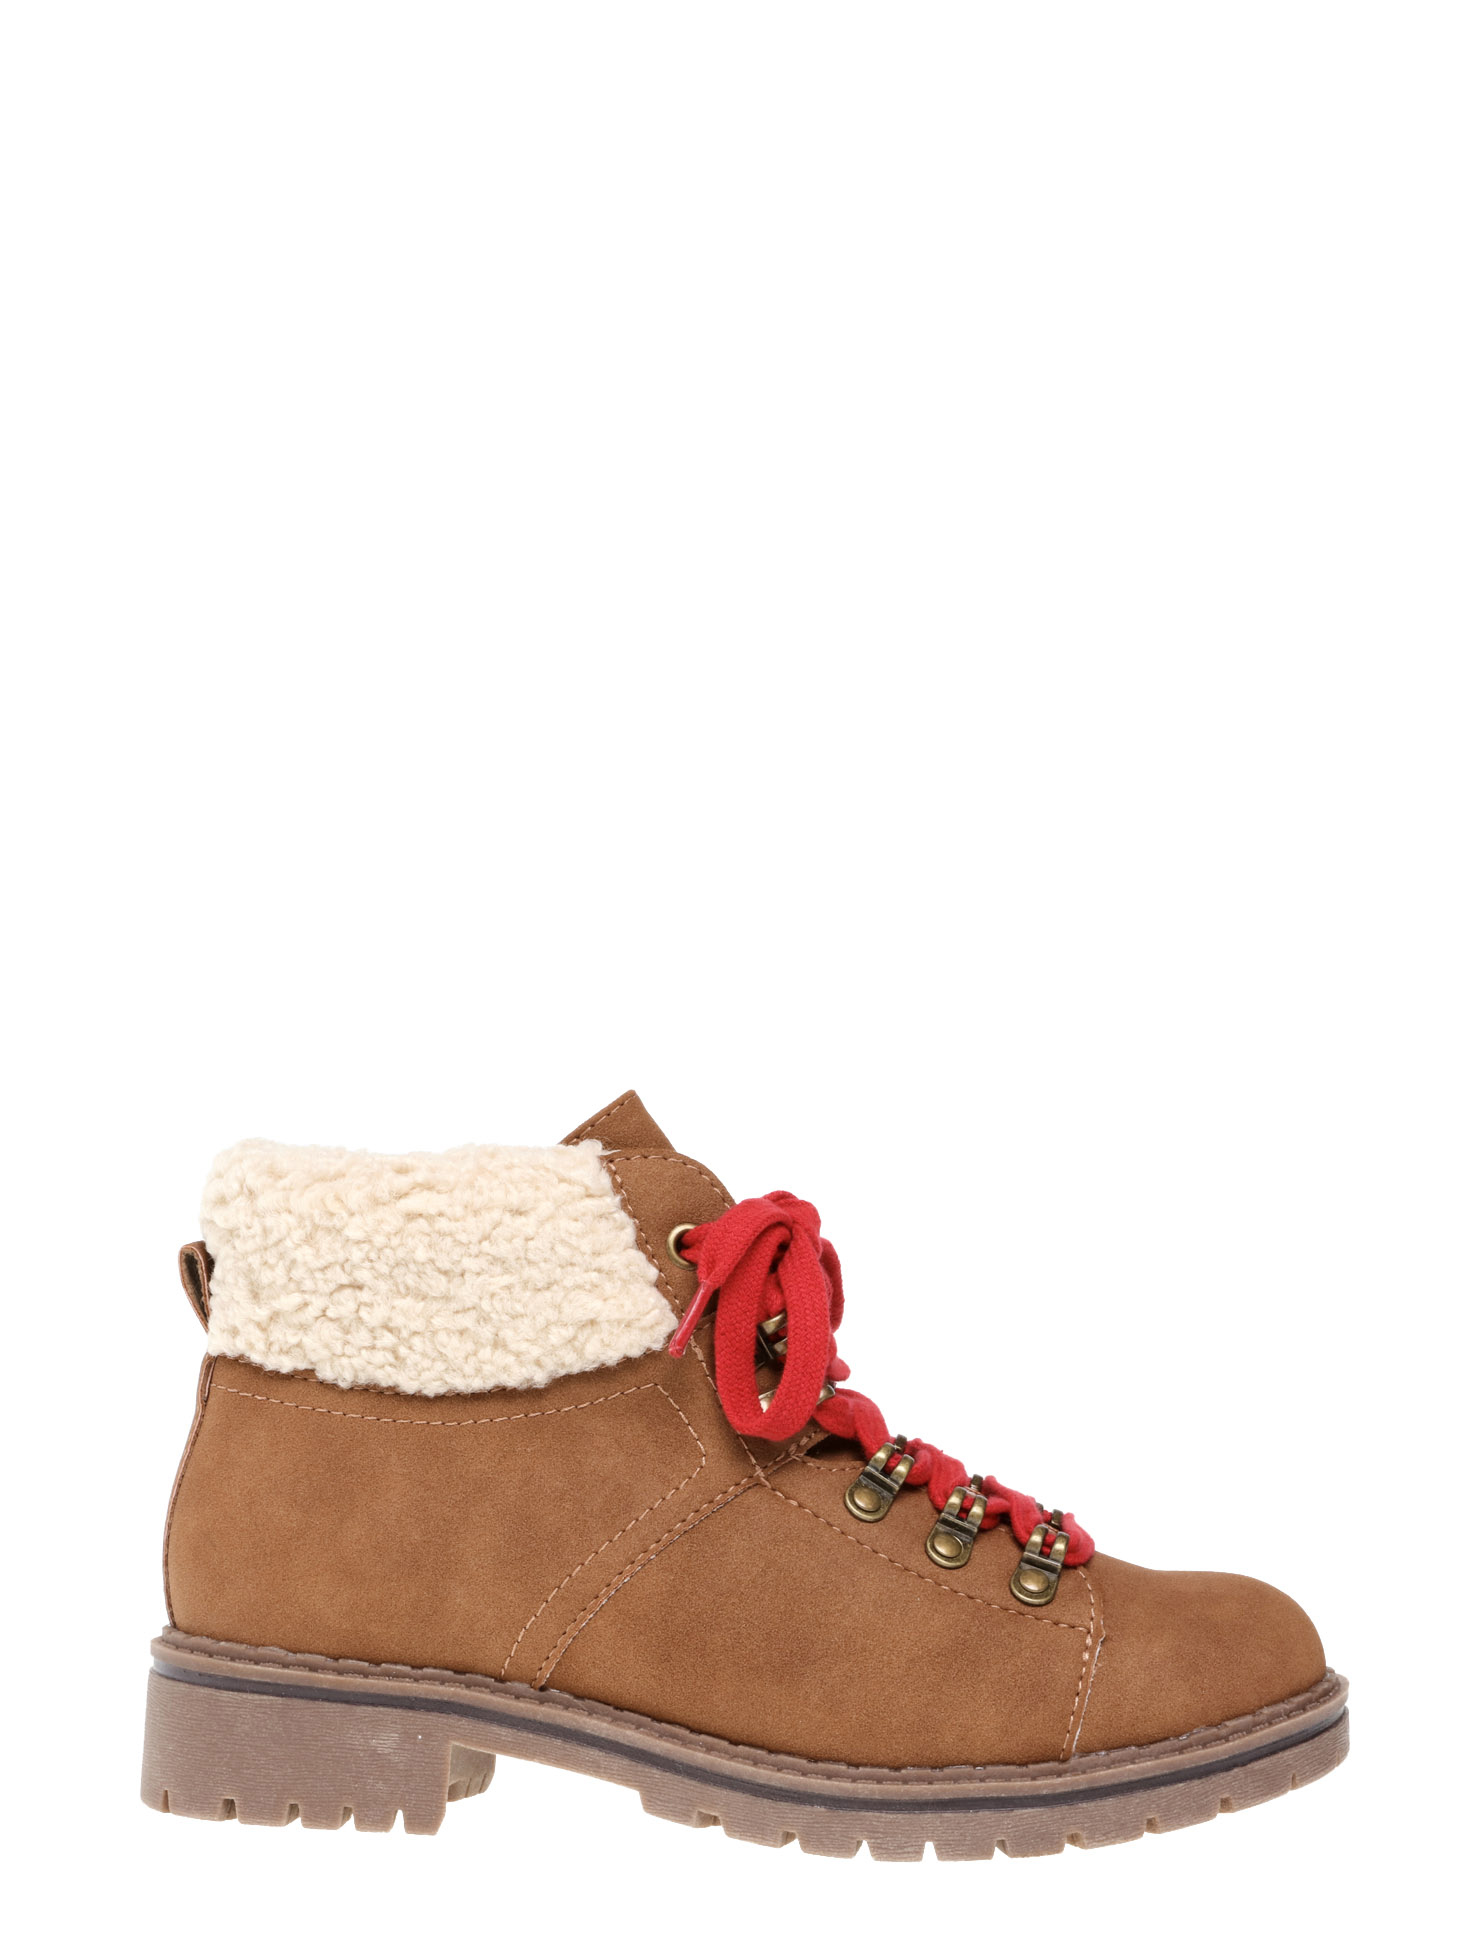 Wonder Nation Faux Collared Lace Up Fur Boot (Little Girls & Big Girls) - image 3 of 6